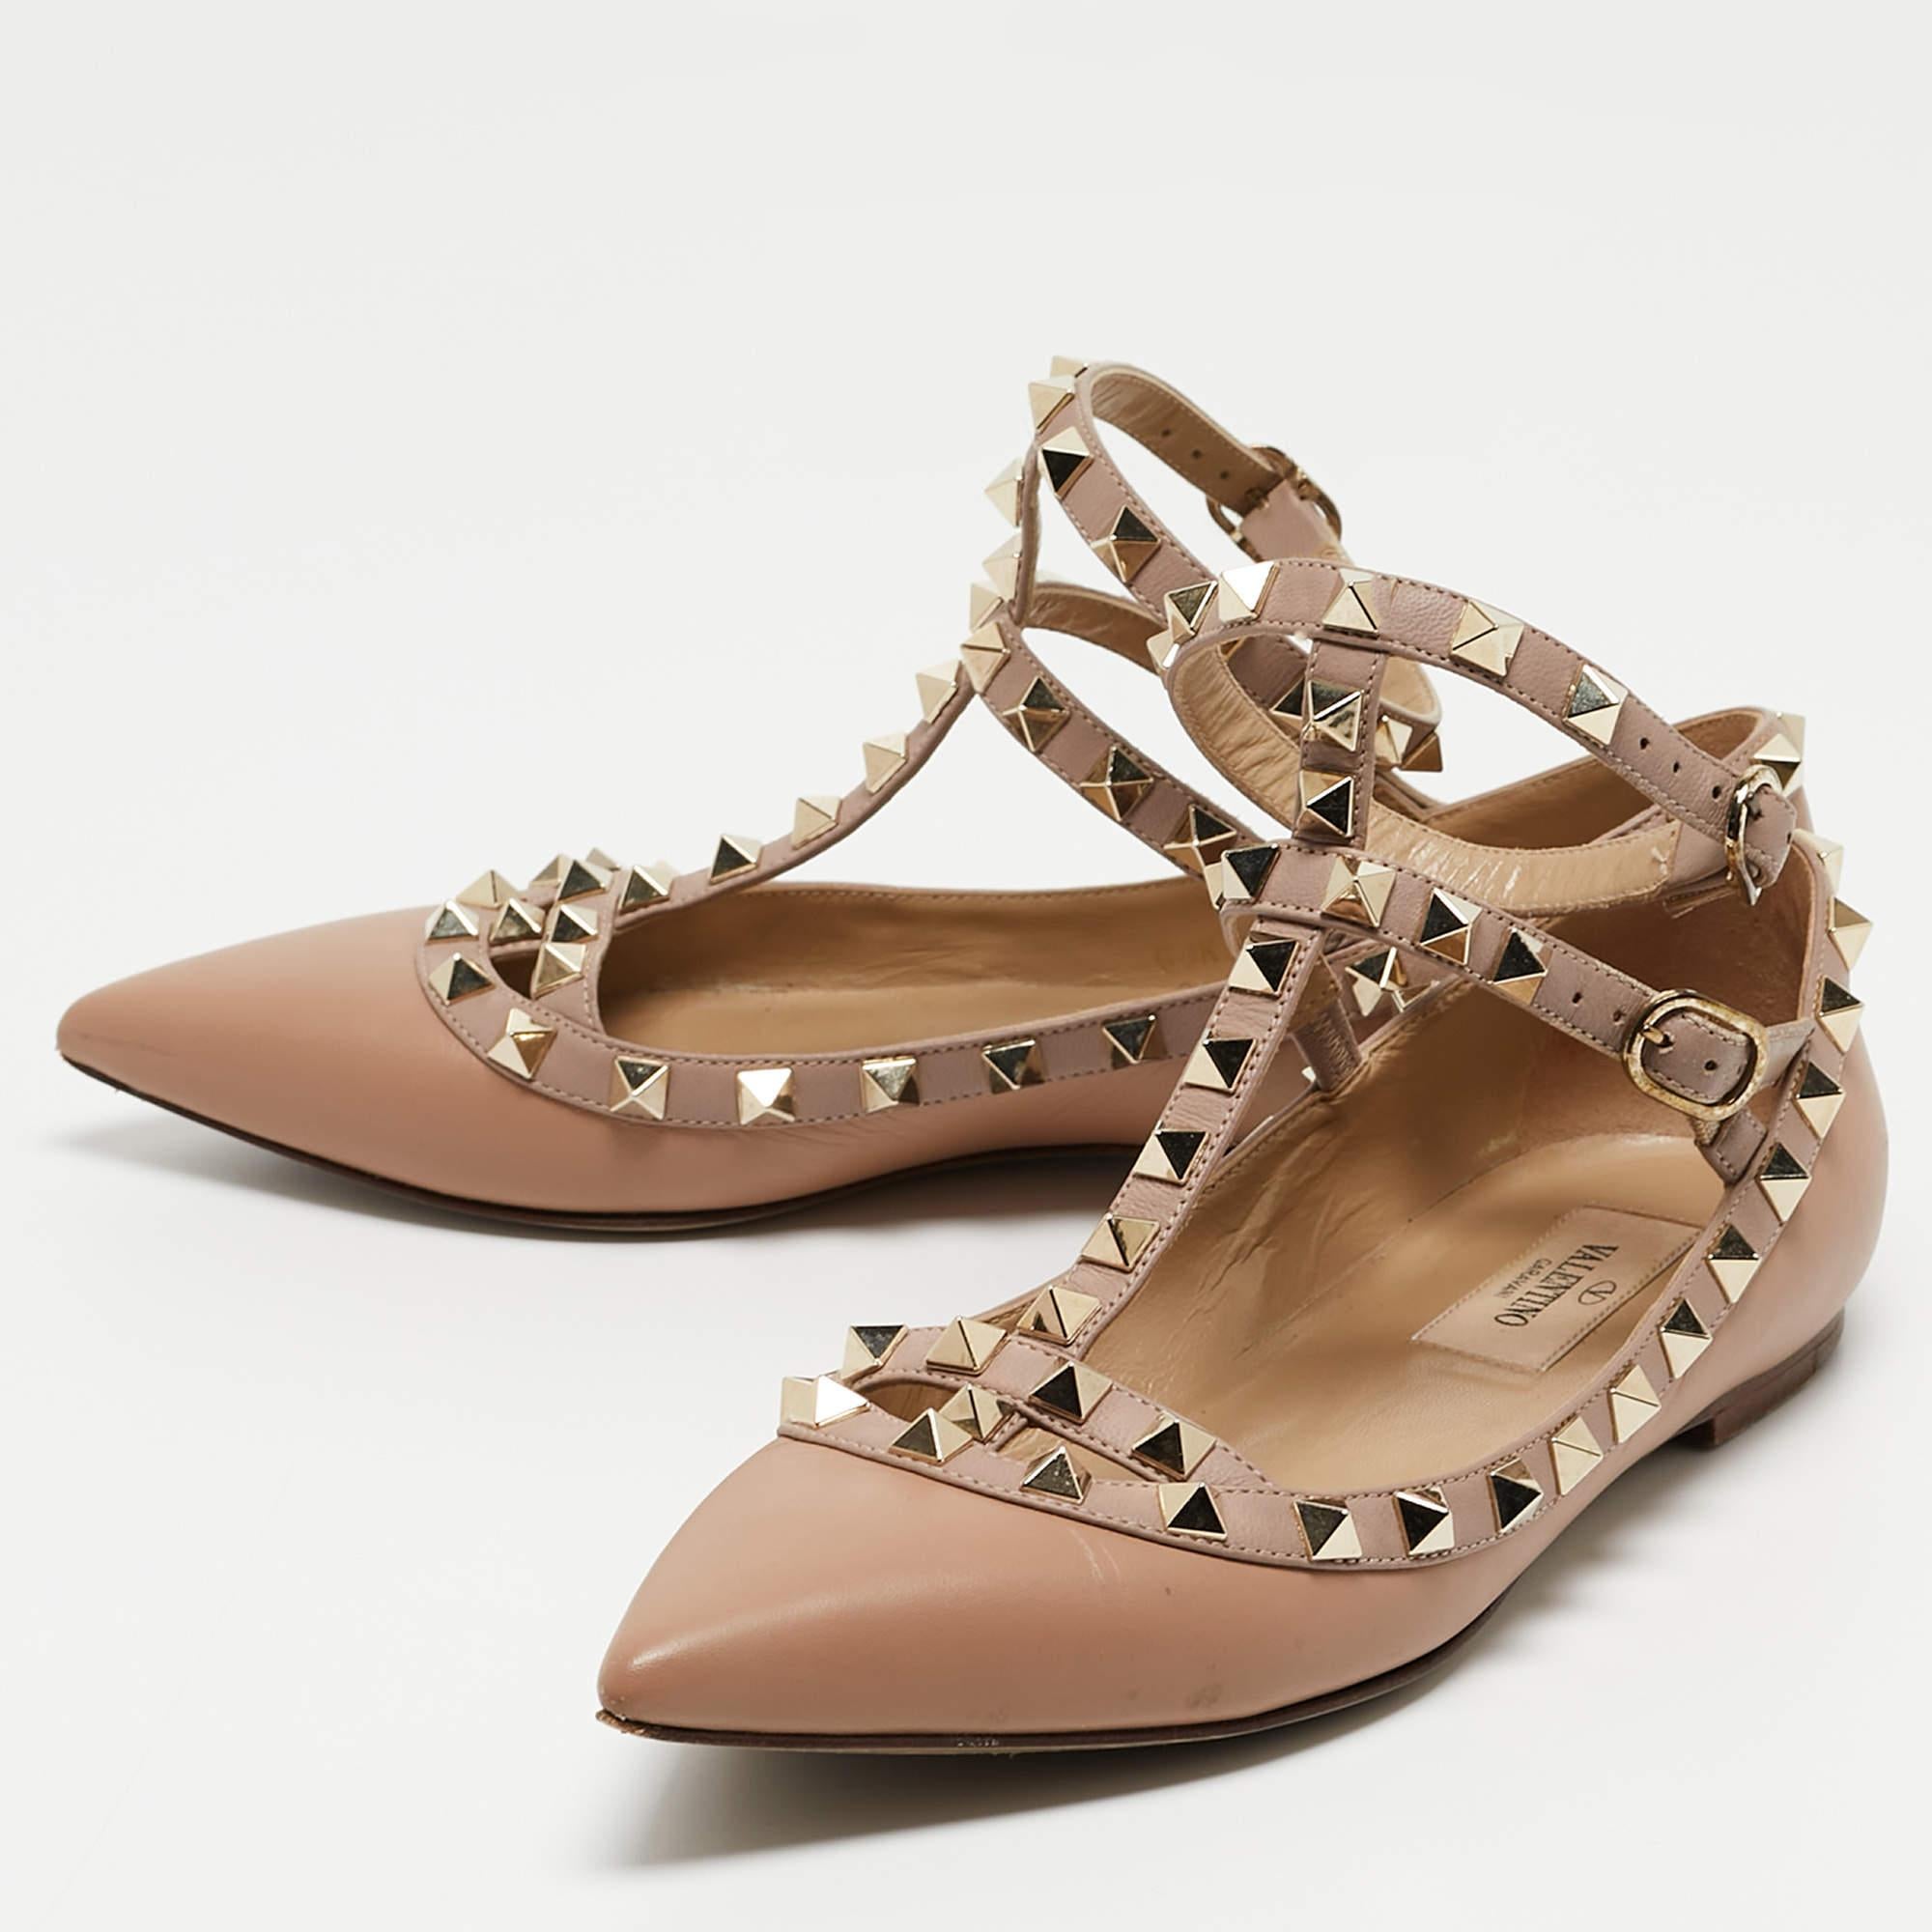 The addition of Rockstuds on the straps of these Valentino flats leads to instant brand identification. Made from leather, they embody a leather exterior and flaunt an ankle buckle closure.

